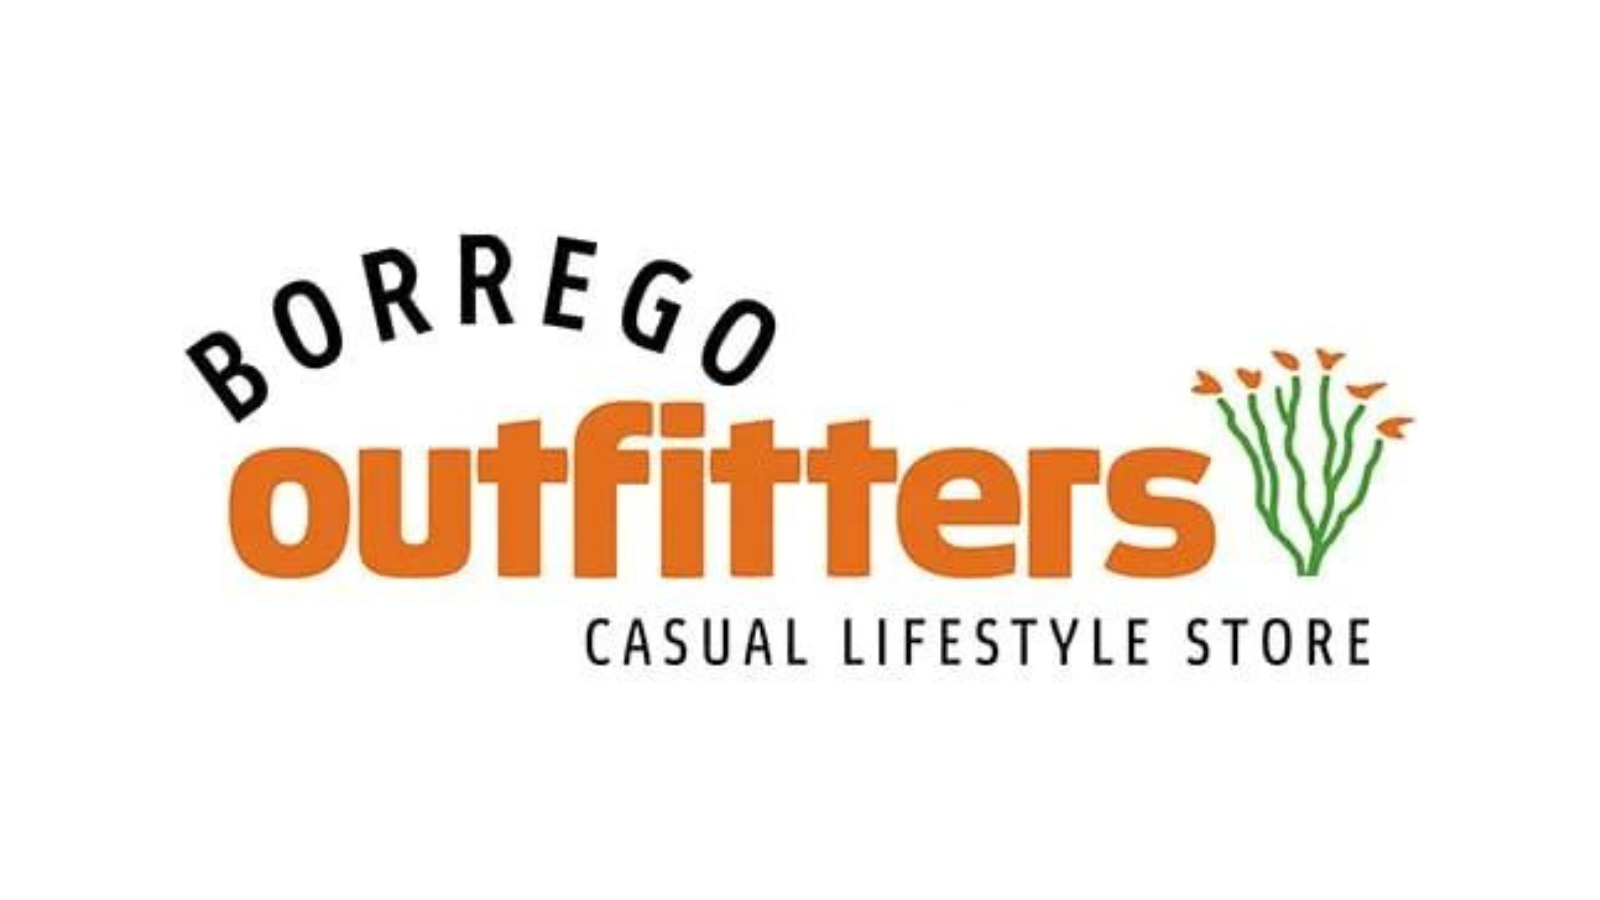 Borrego Outfitters
